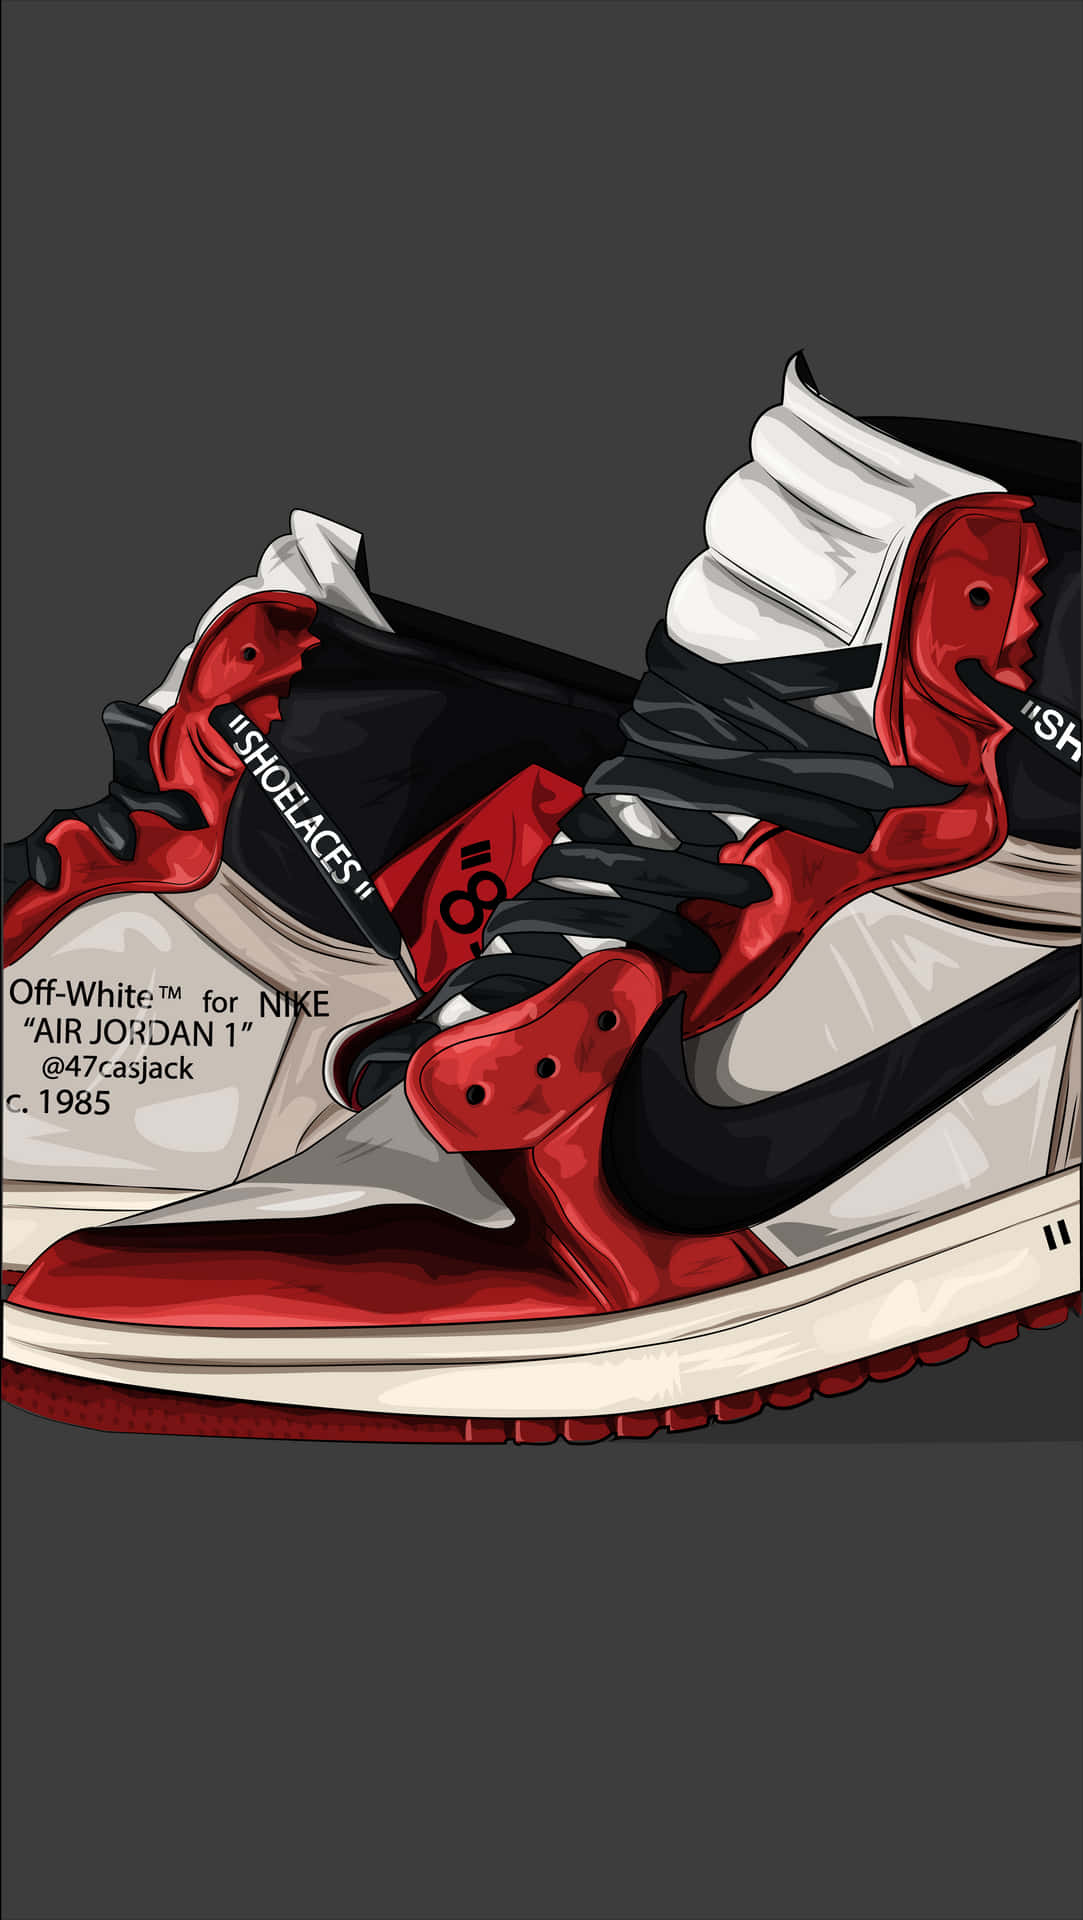 "Fly Away with the Off-White Jordan 1 shoes" Wallpaper